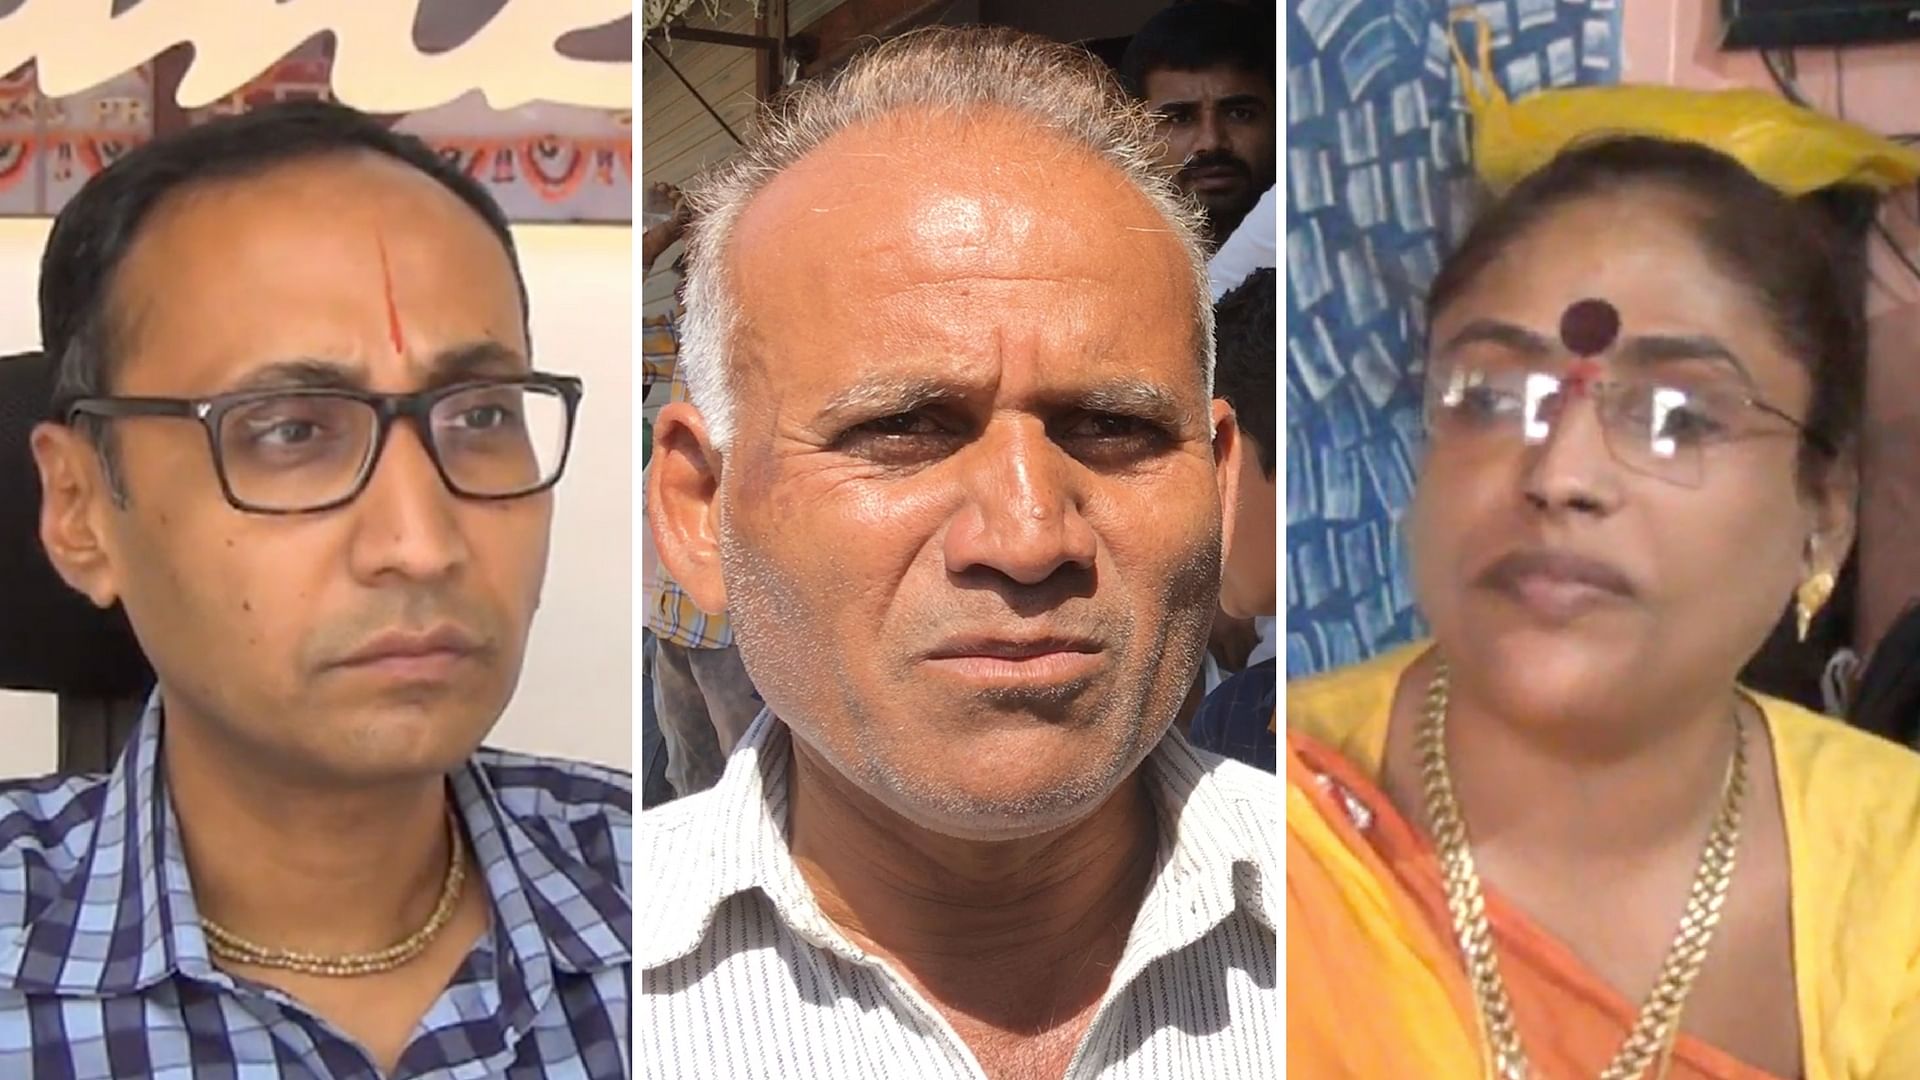 From no government jobs to reservation, these 5 voters talk about what will define their vote in the Gujarat elections.